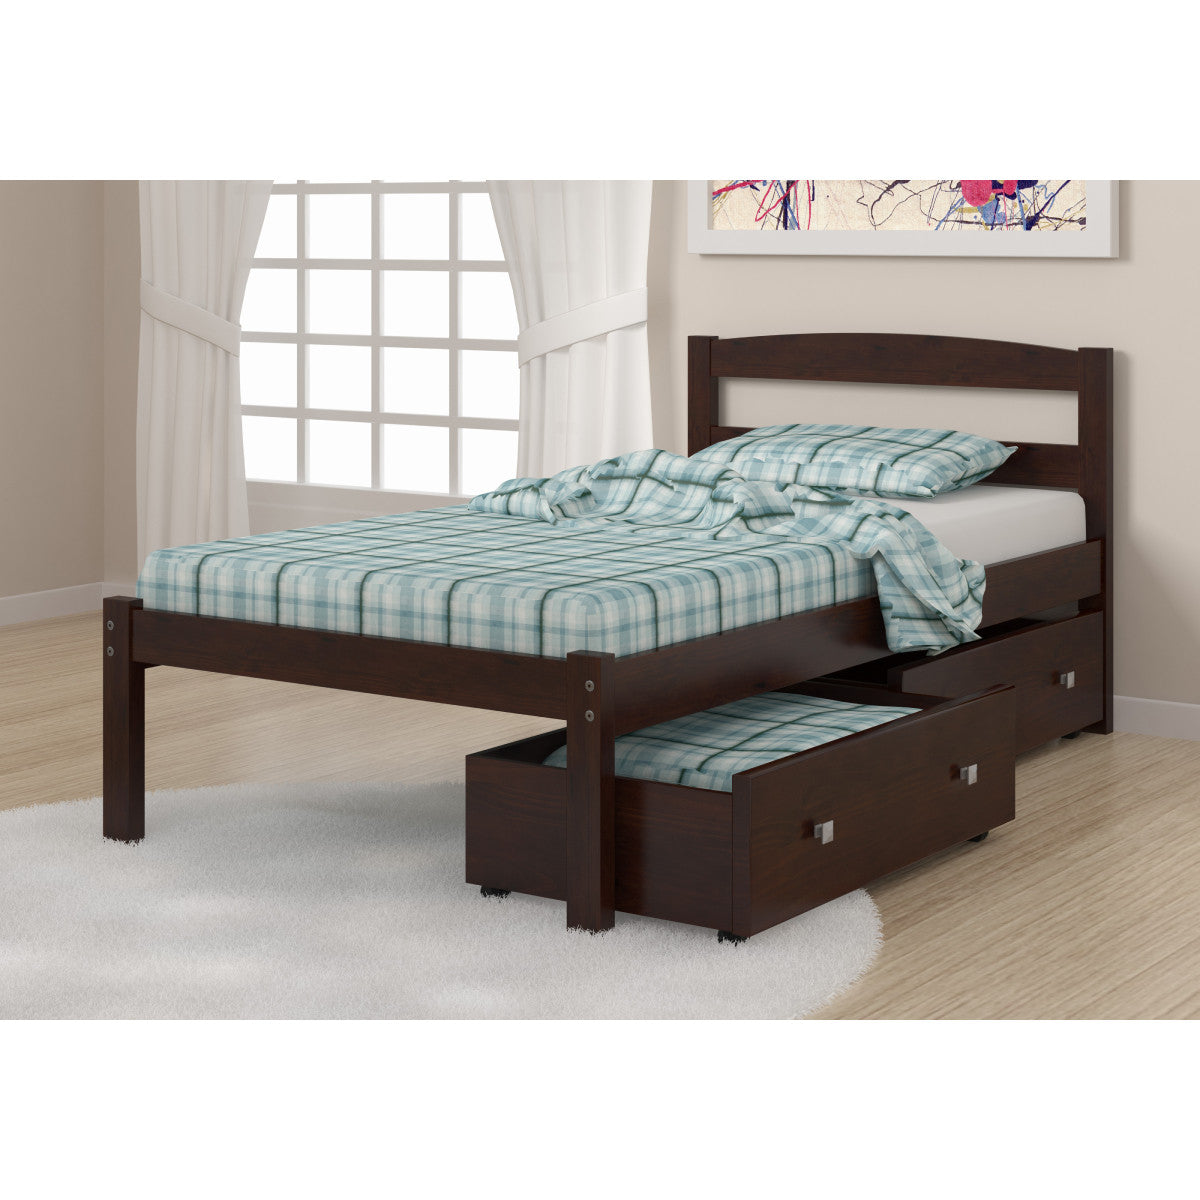 TWIN ECONO BED WITH DUAL UNDER BED DRAWER DARK CAPPUCCINO FINISH